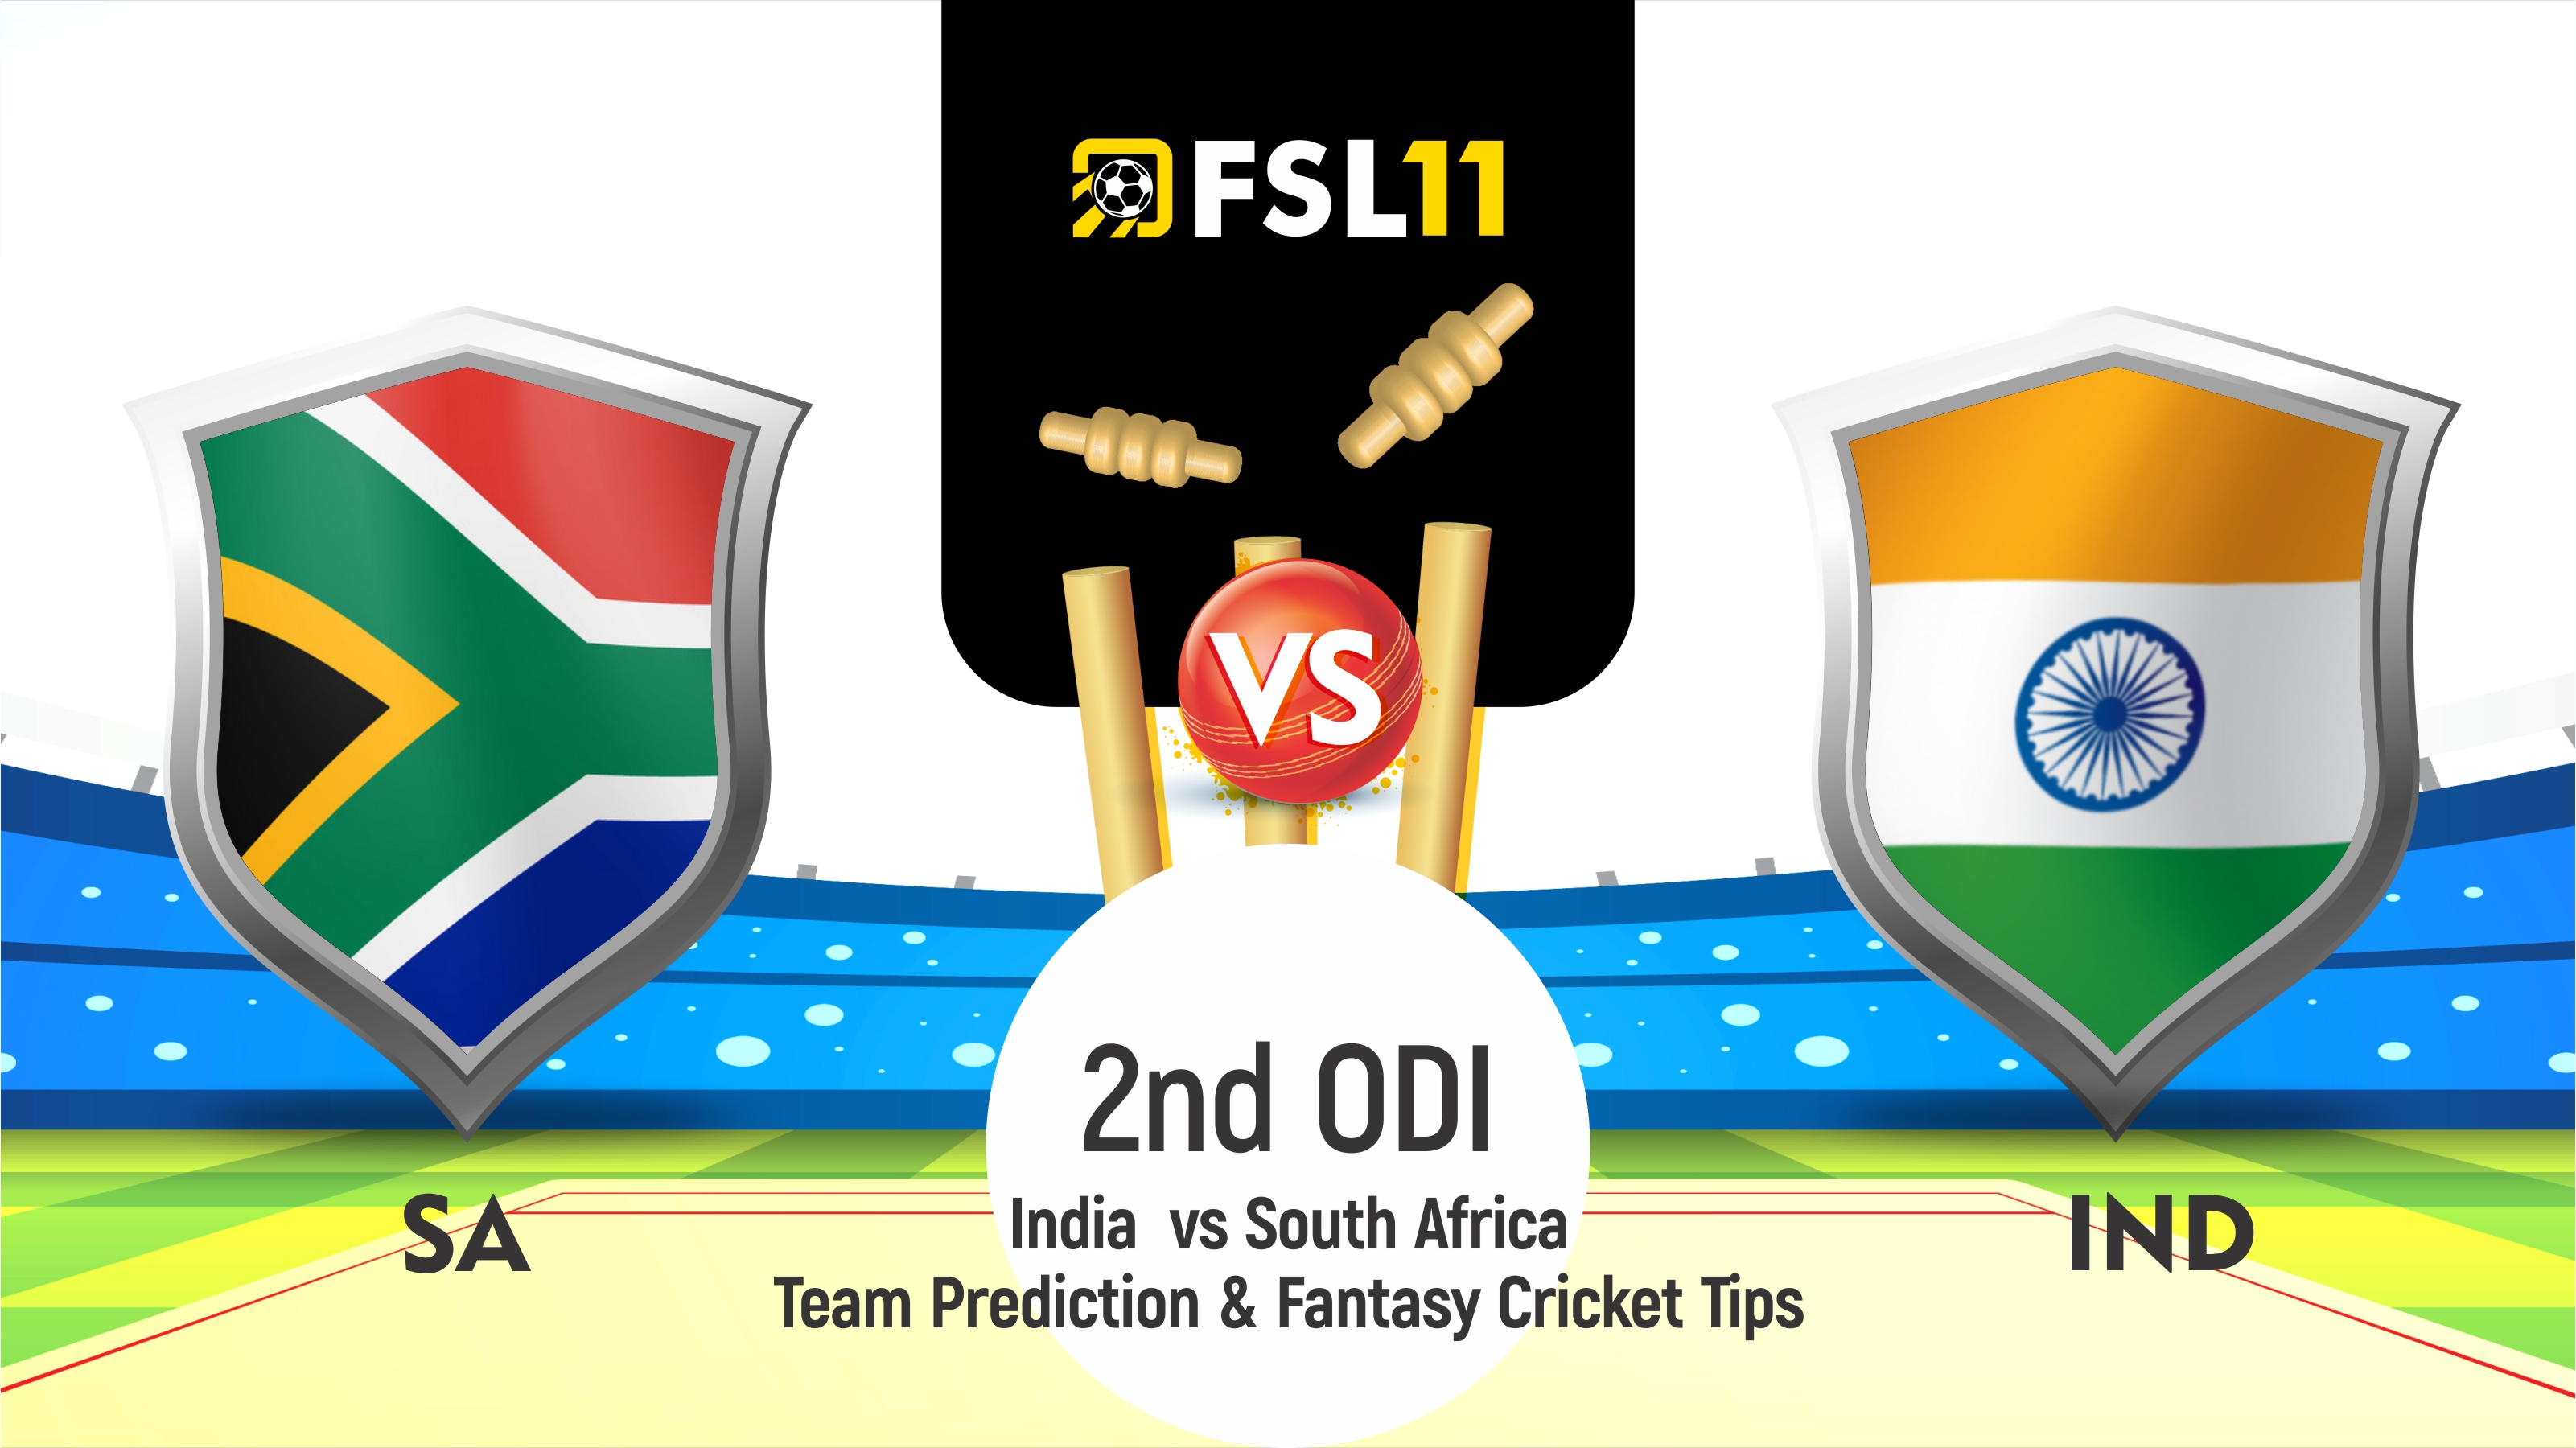 India vs South Africa 2nd ODI Match Prediction & Preview